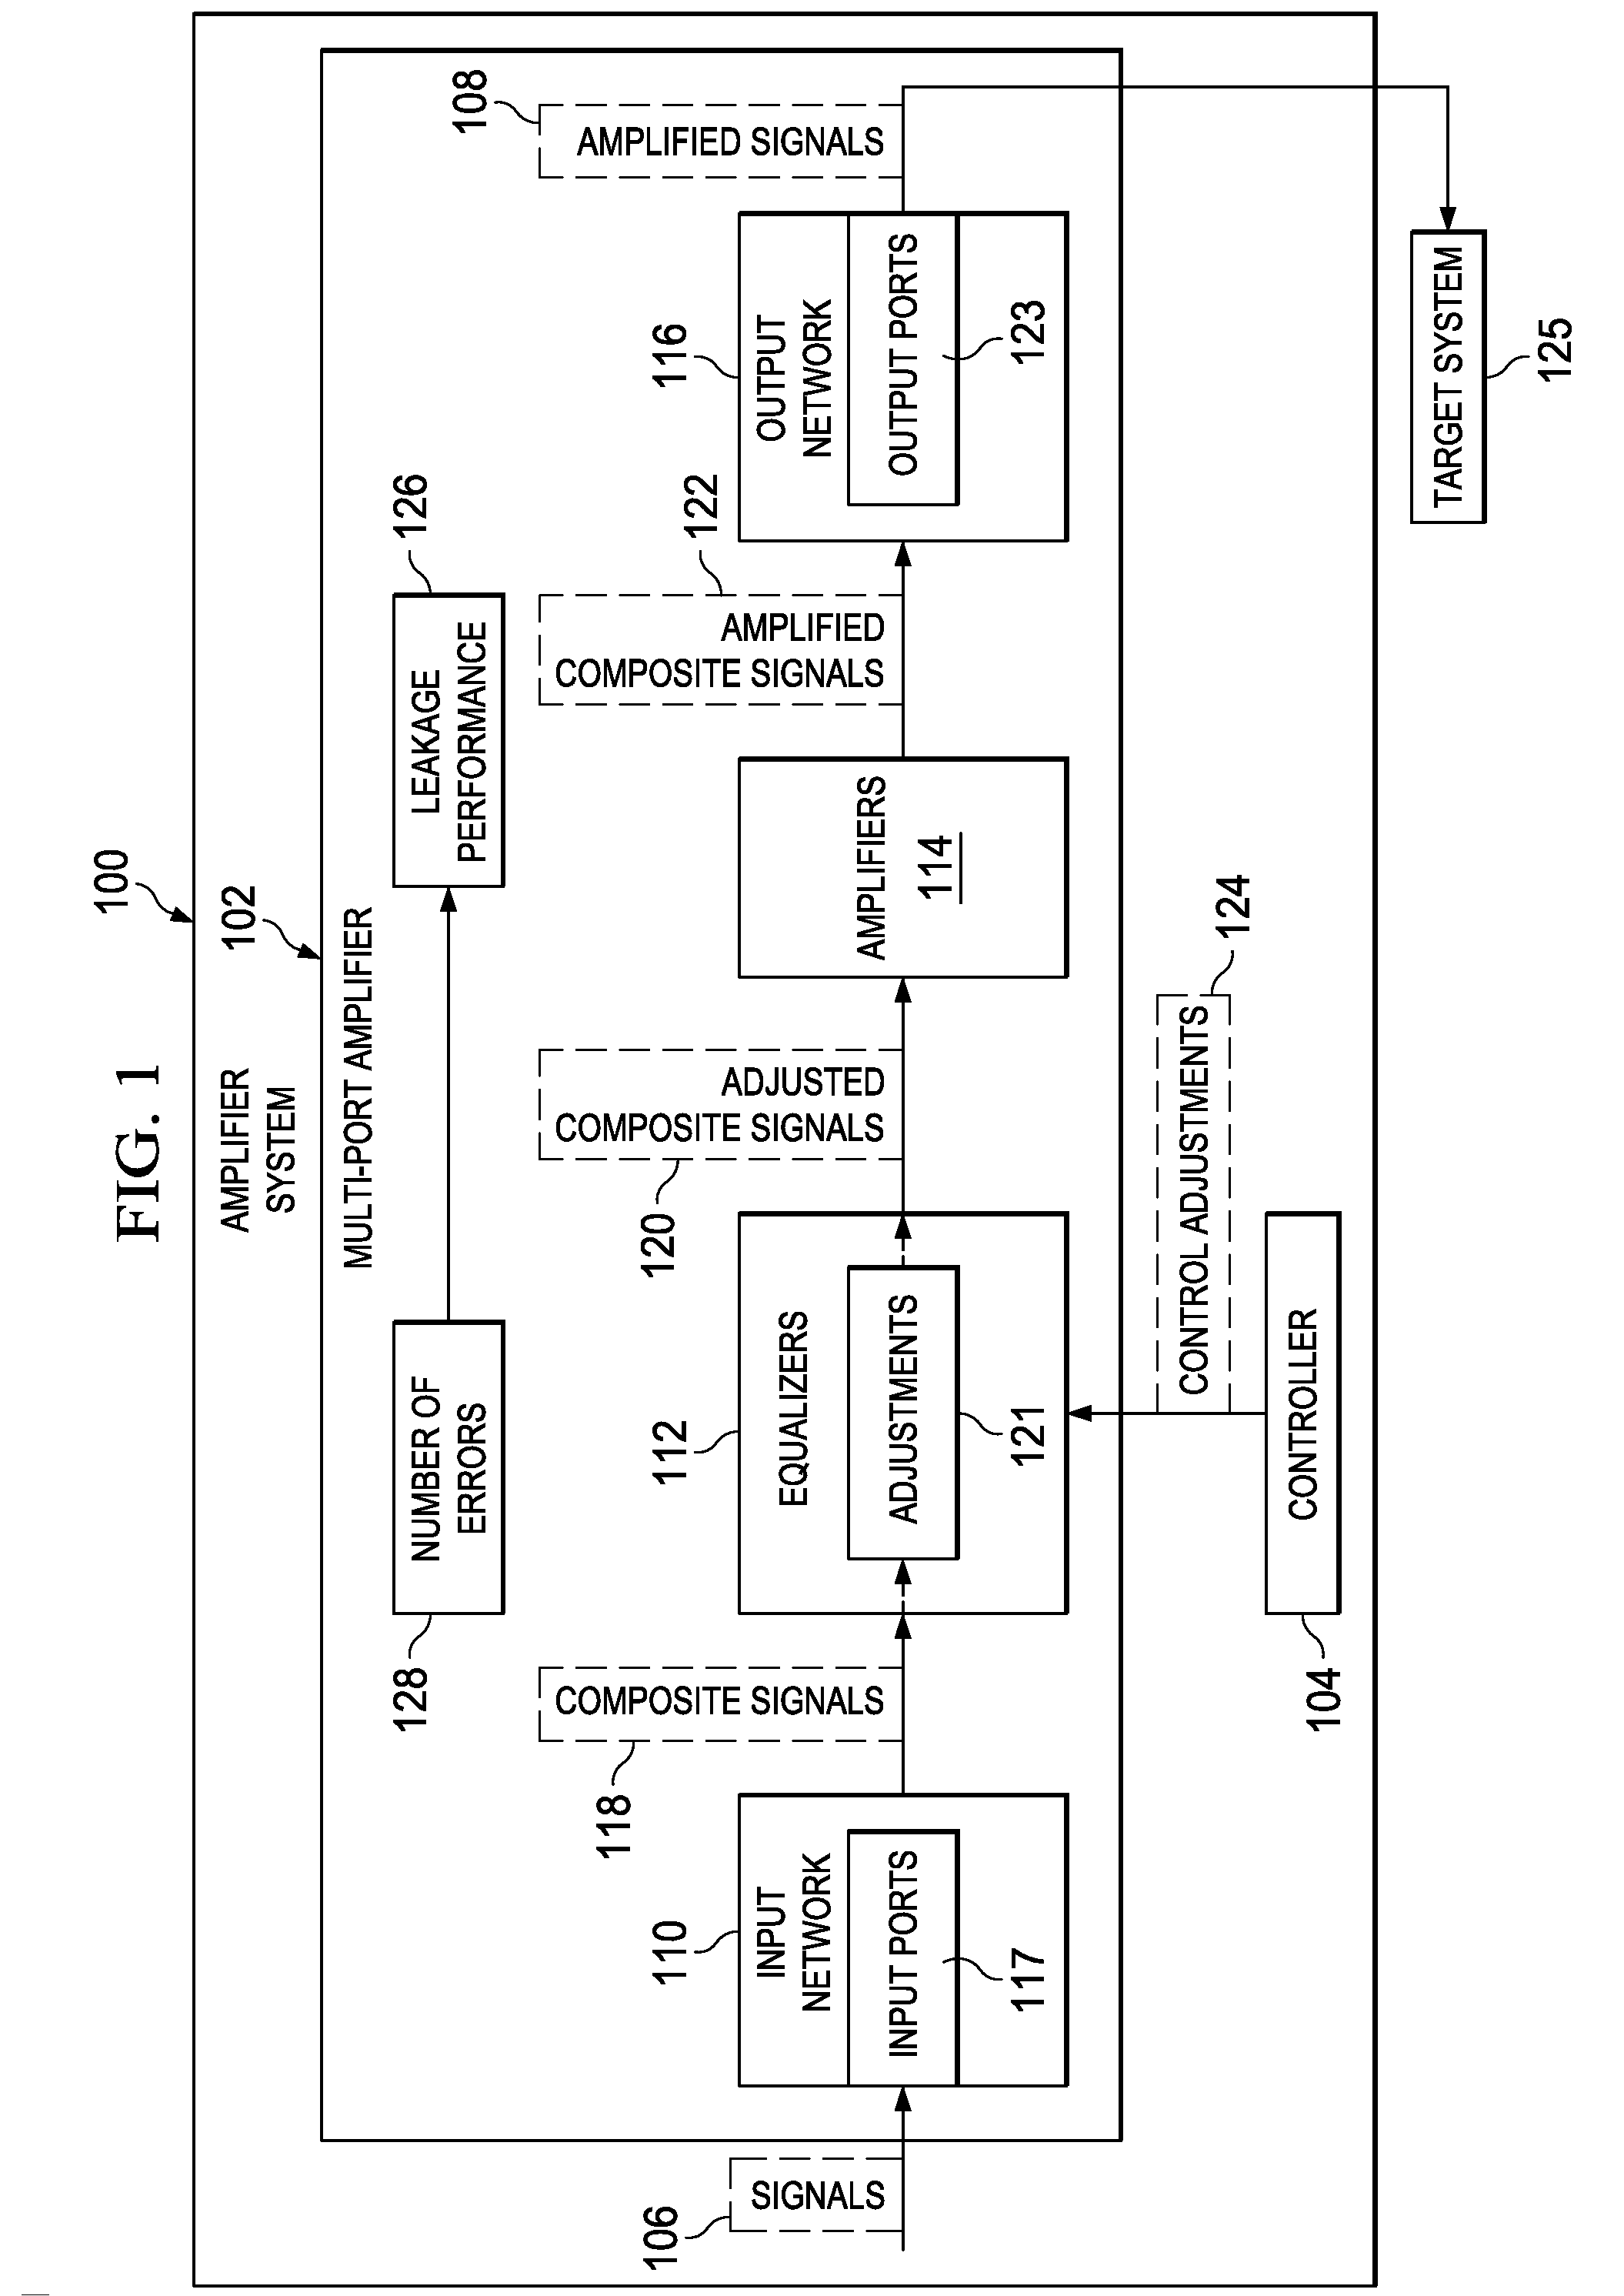 Method and Apparatus for Improving Leakage Performance of a Multi-Port Amplifier